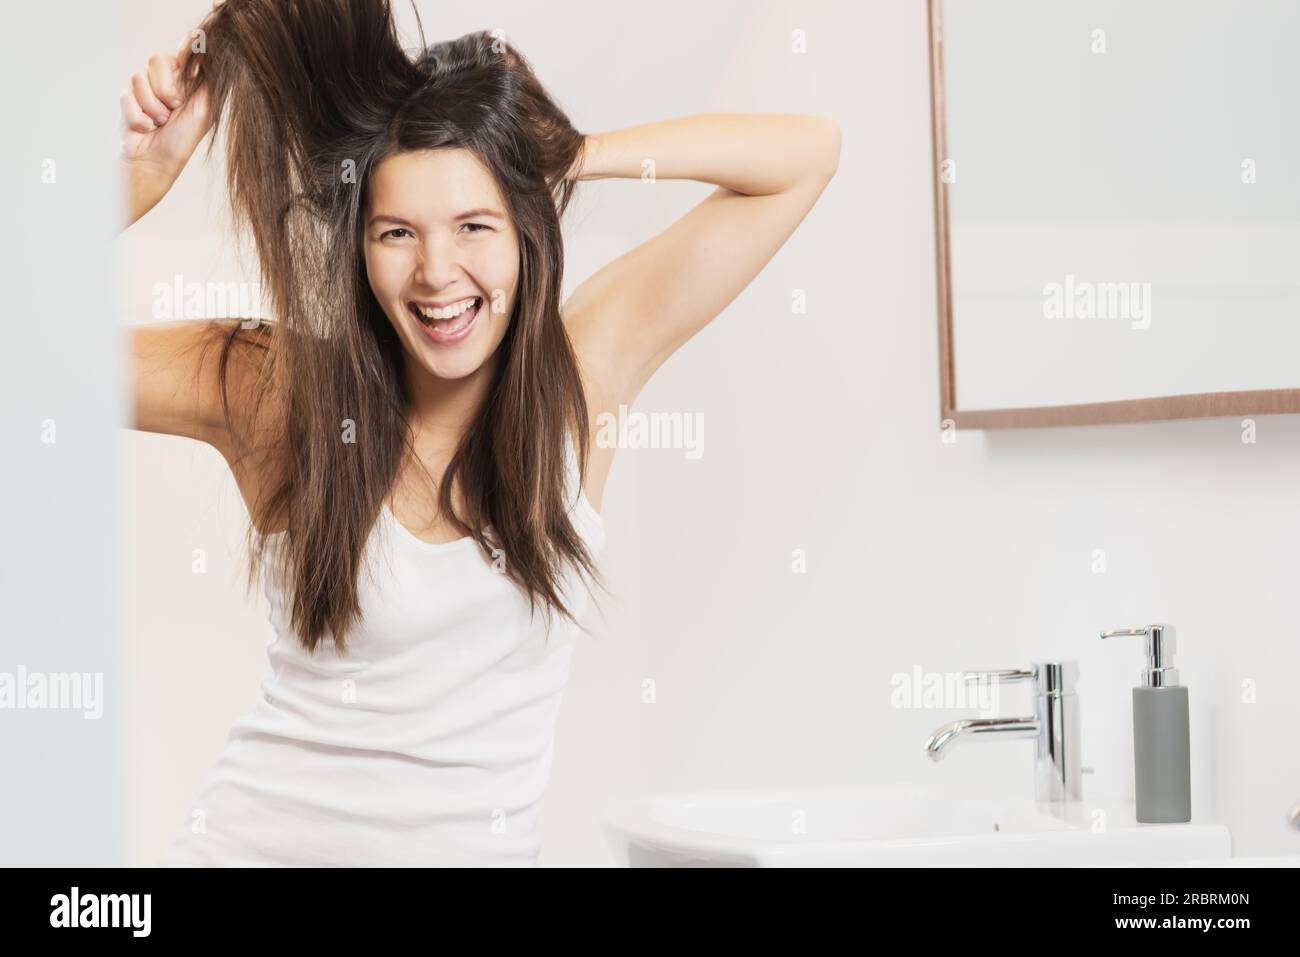 Woman yelling in frustration as she brushes her hair standing in the bathroom tugging at her unruly locks and tangles Stock Photo